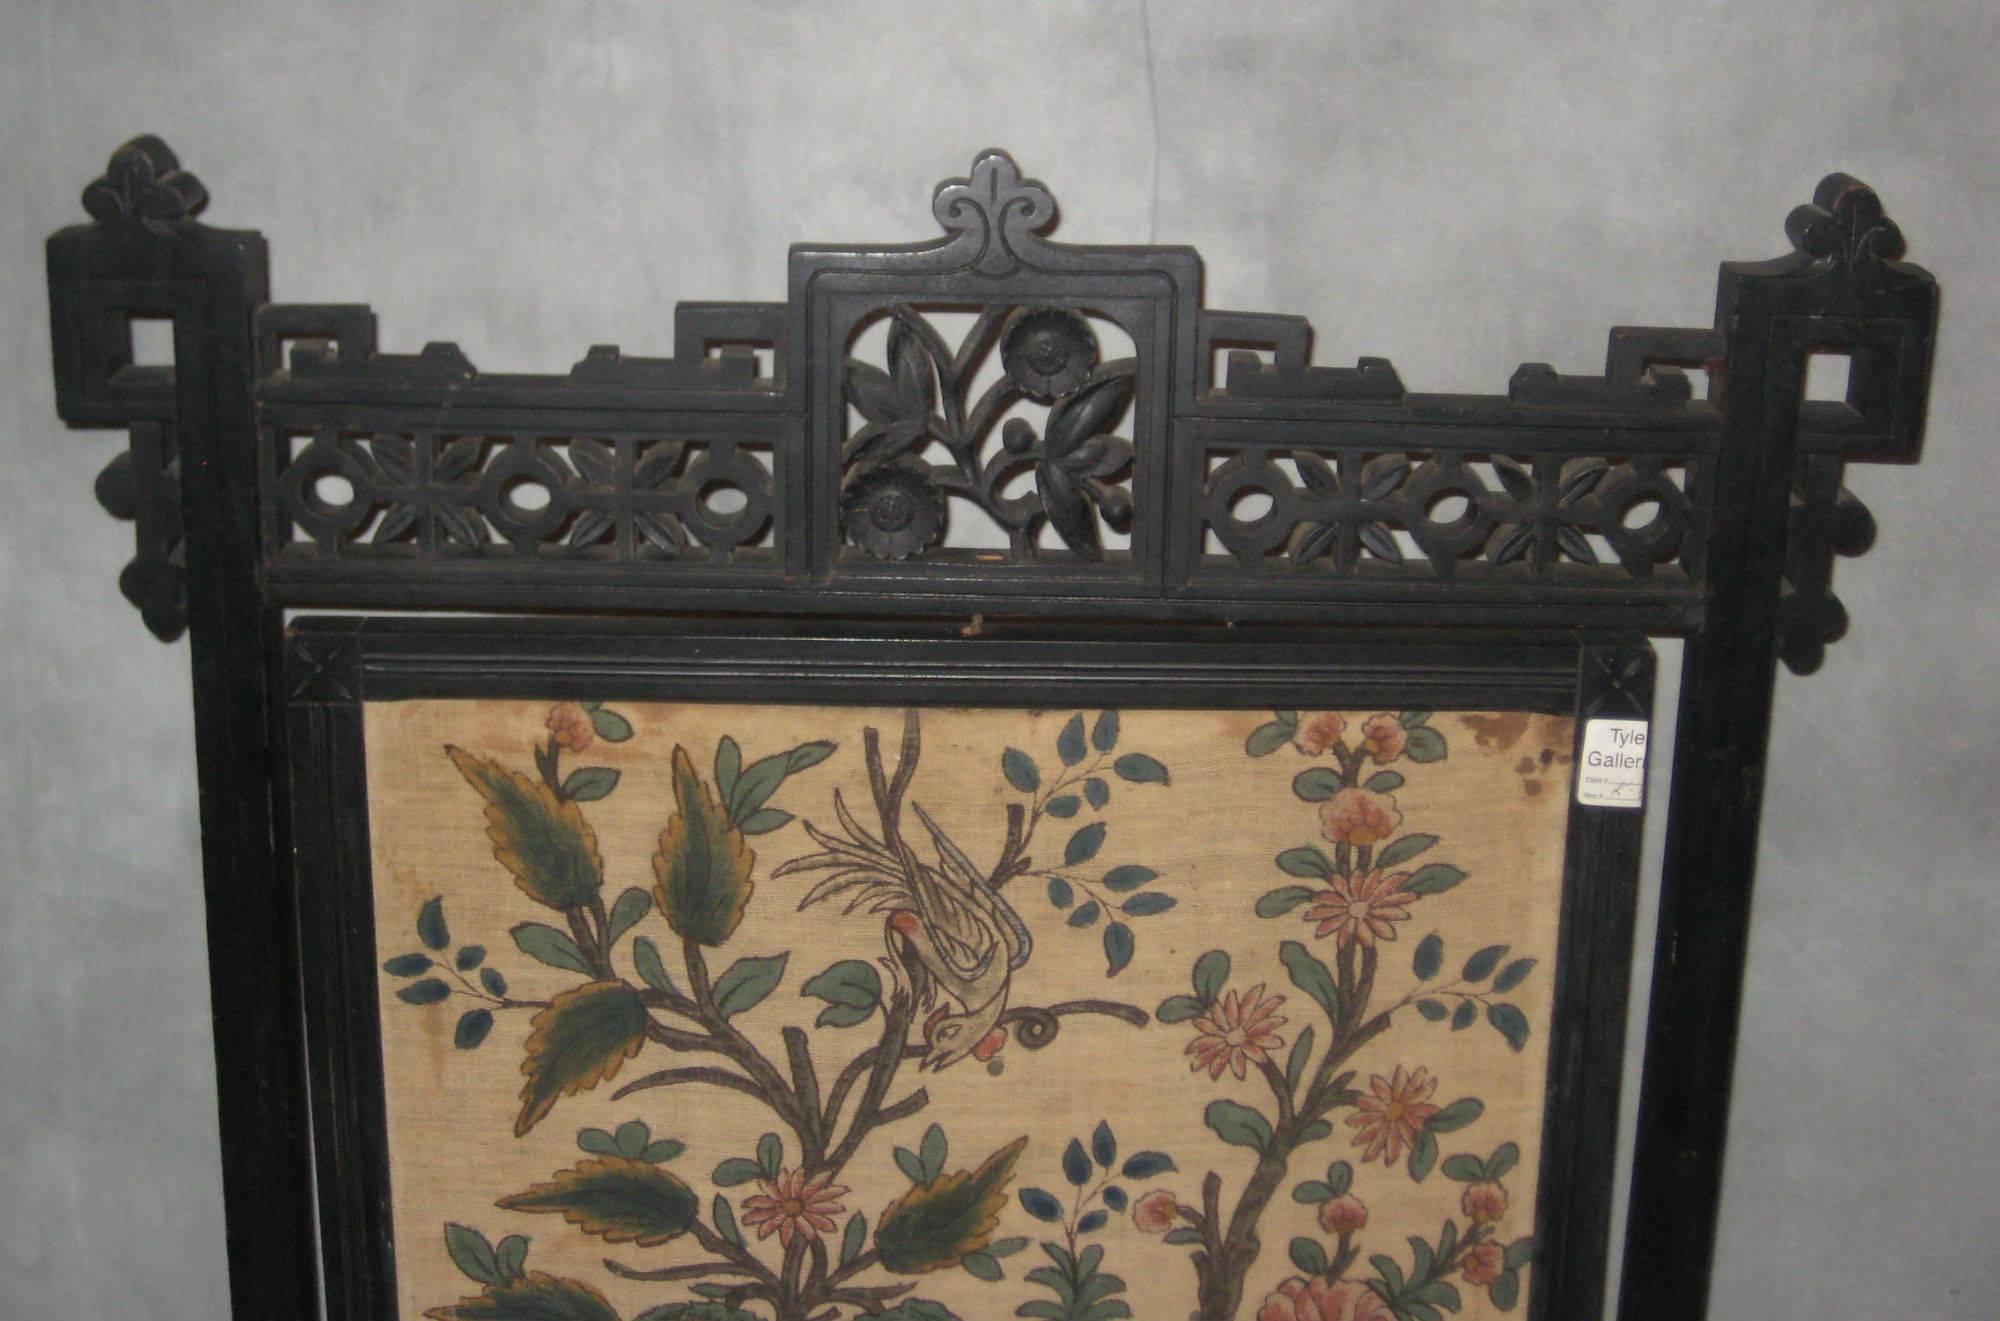 Aesthetic period firescreen in classic Eastlake style, carved black walnut, with dark finish appropriate for the period, pivoting (rotating) batik panel depicting bird and flowers the backside plain. 